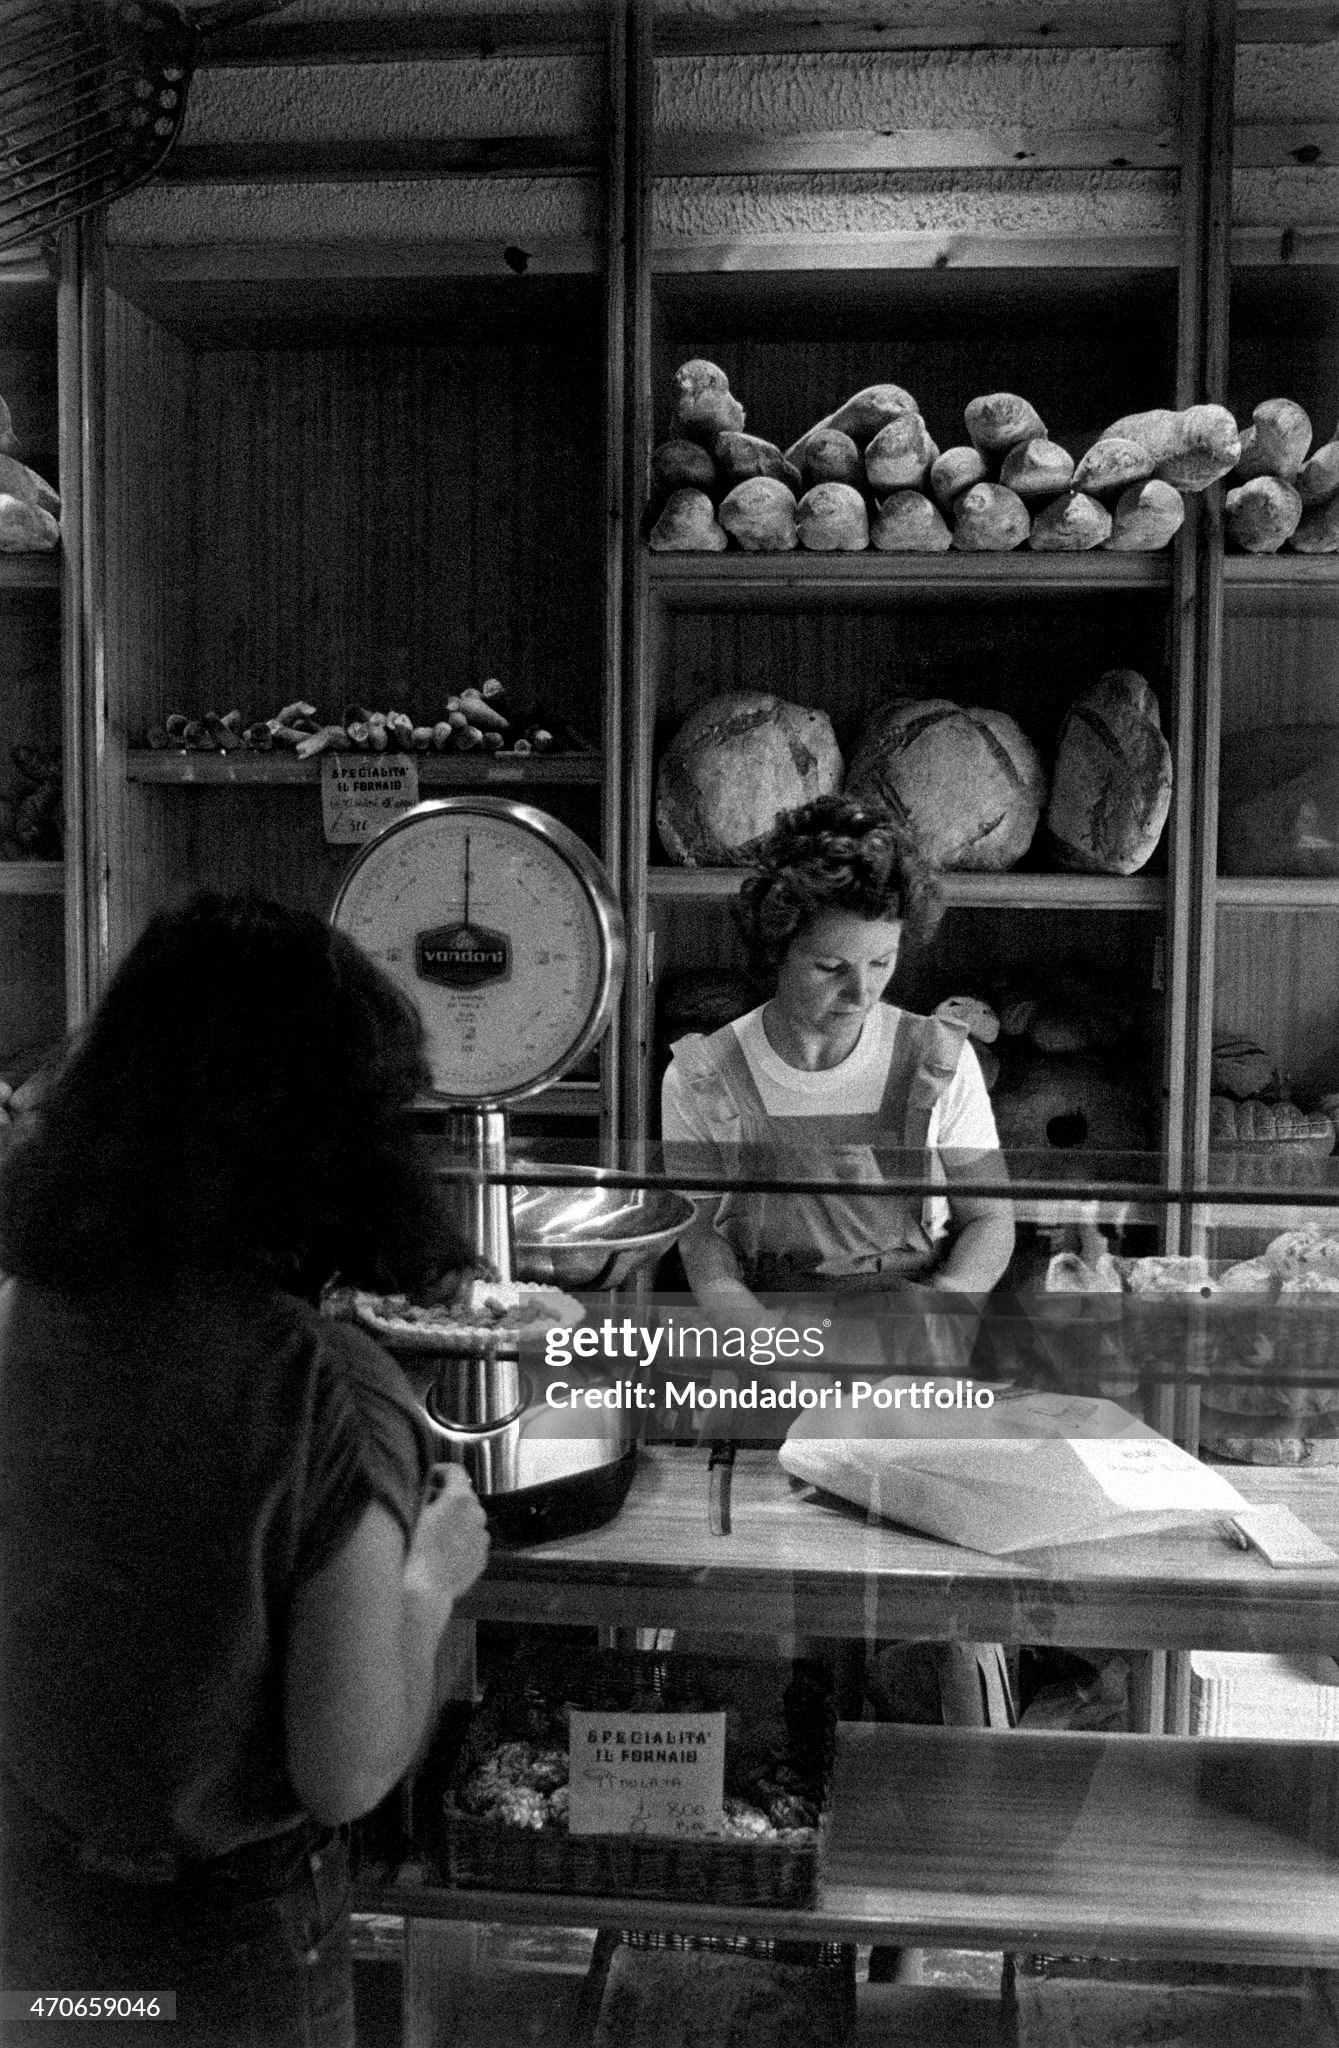 In a bakery the clerk puts some bread in a small bag while the customer, standing in front of her, waits. Milan, Italy, 1980. 